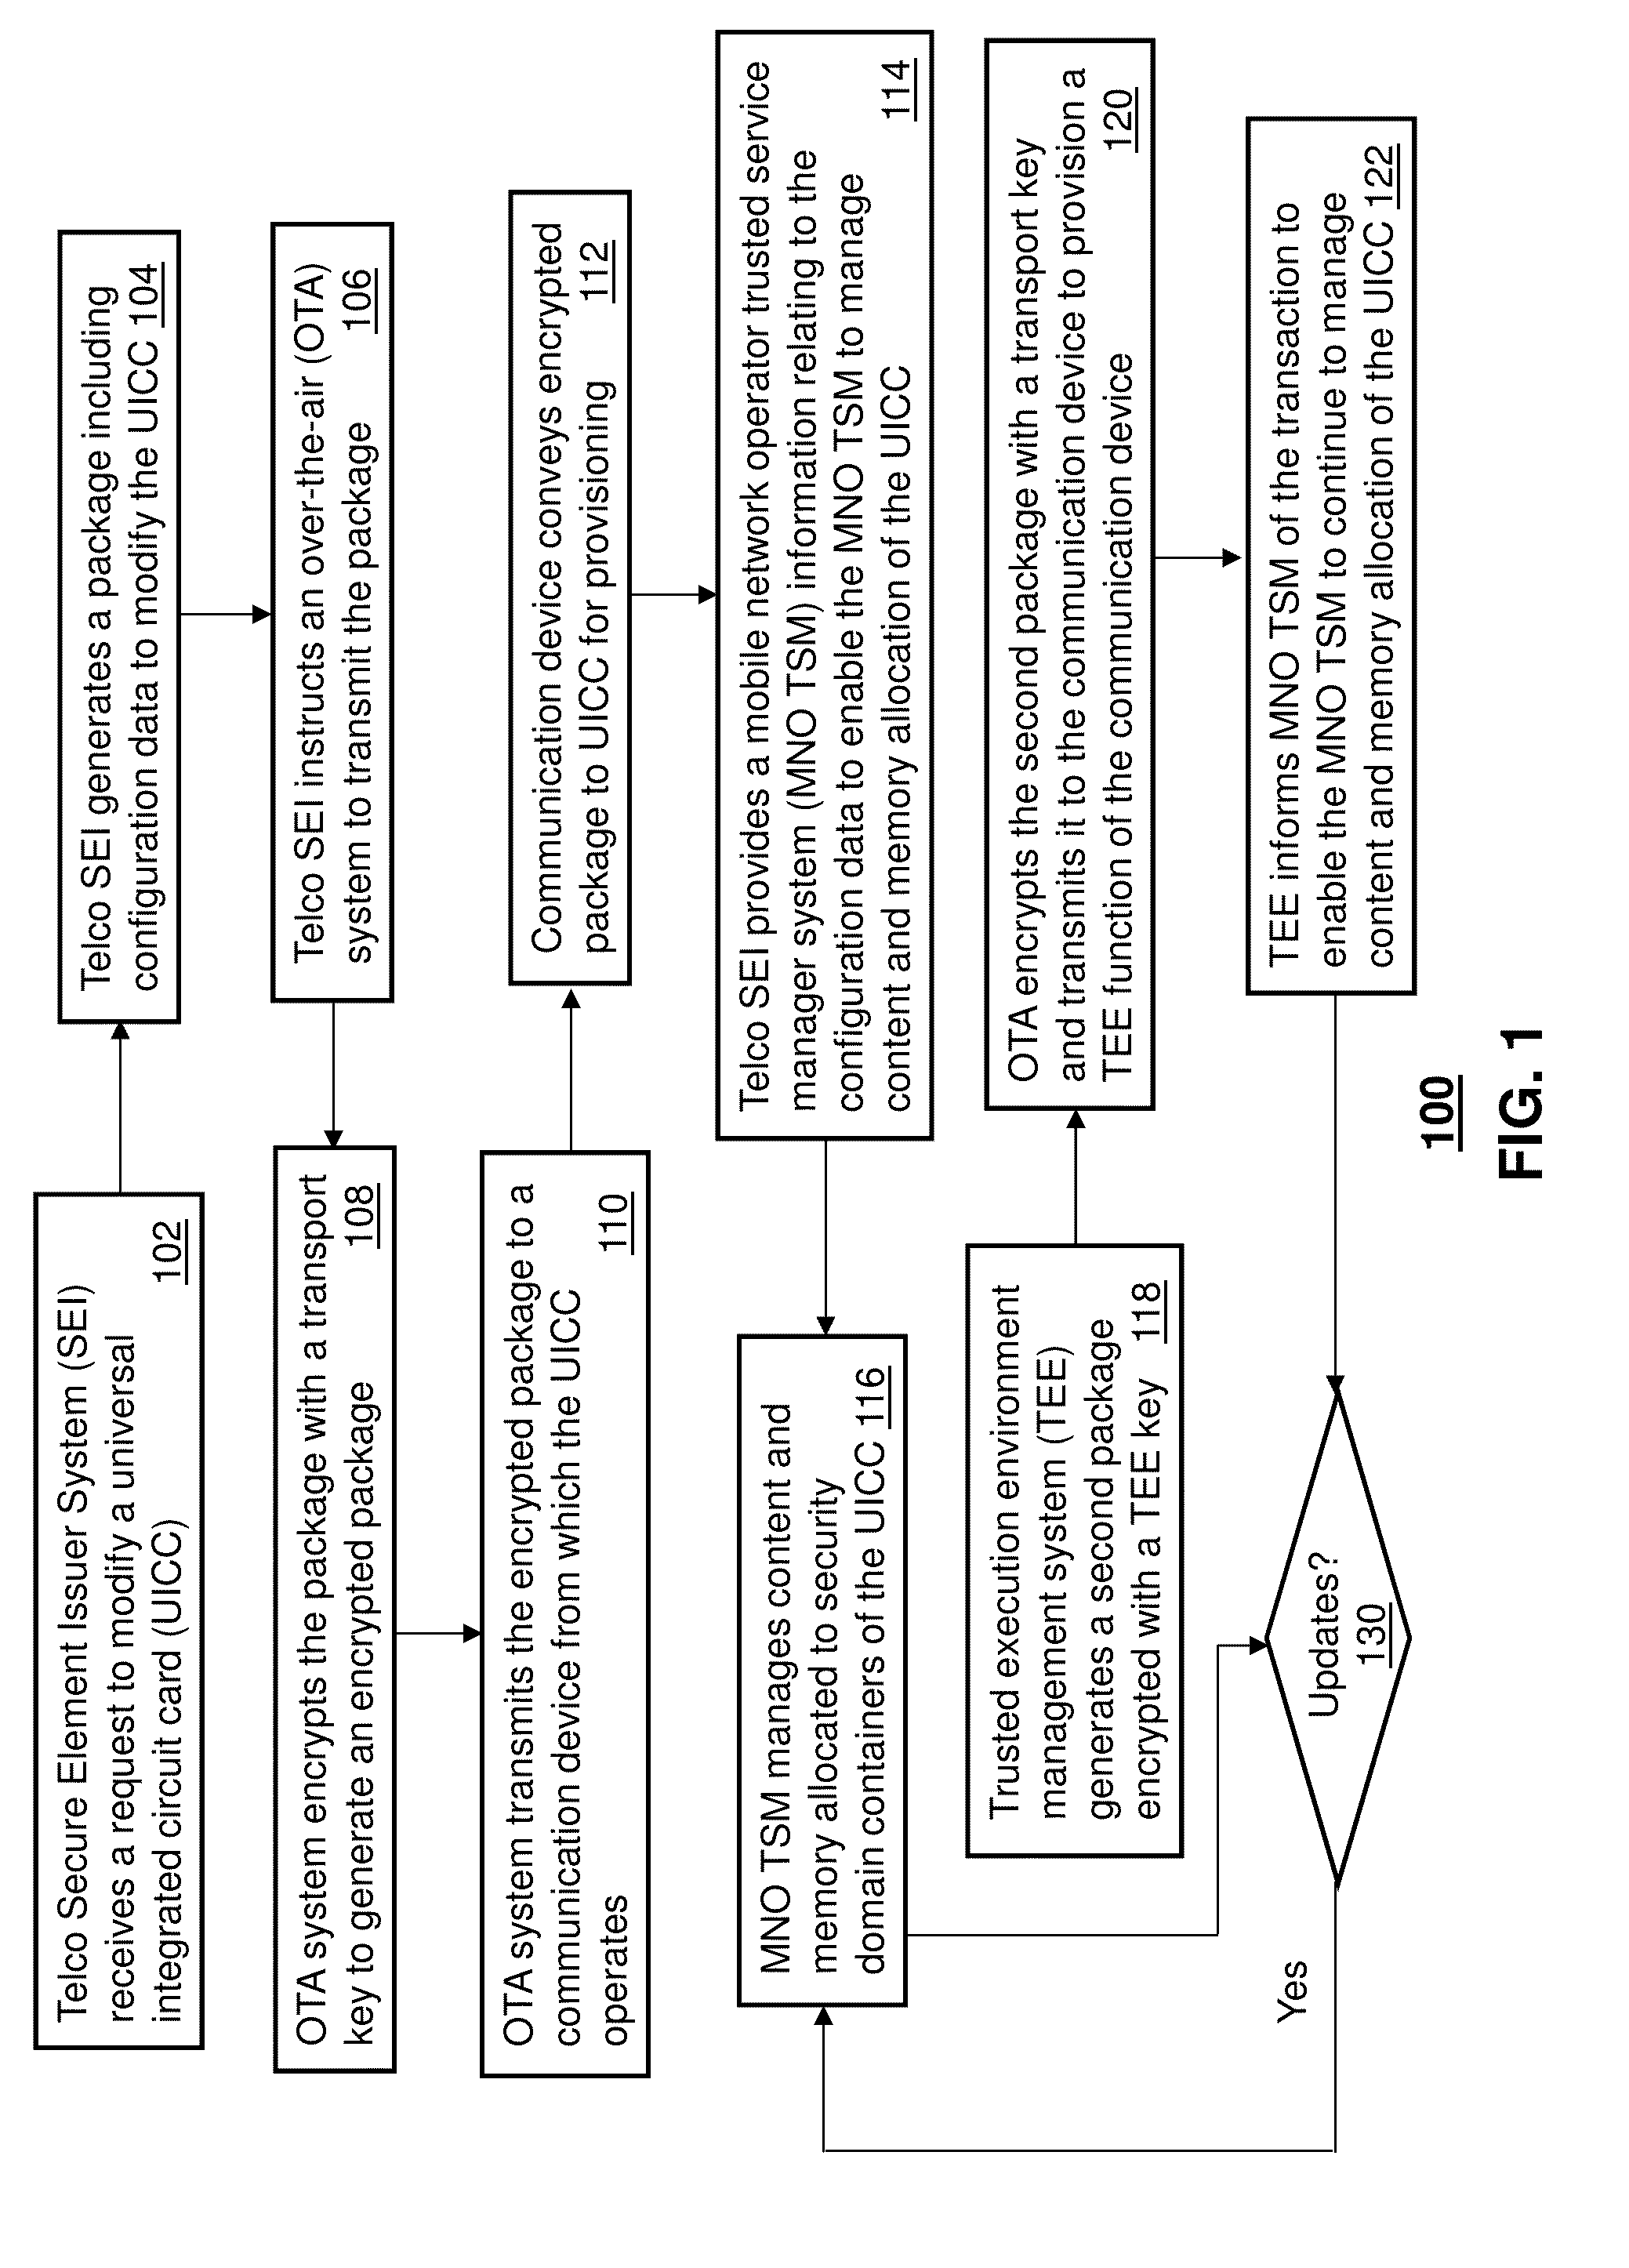 Methods for provisioning universal integrated circuit cards